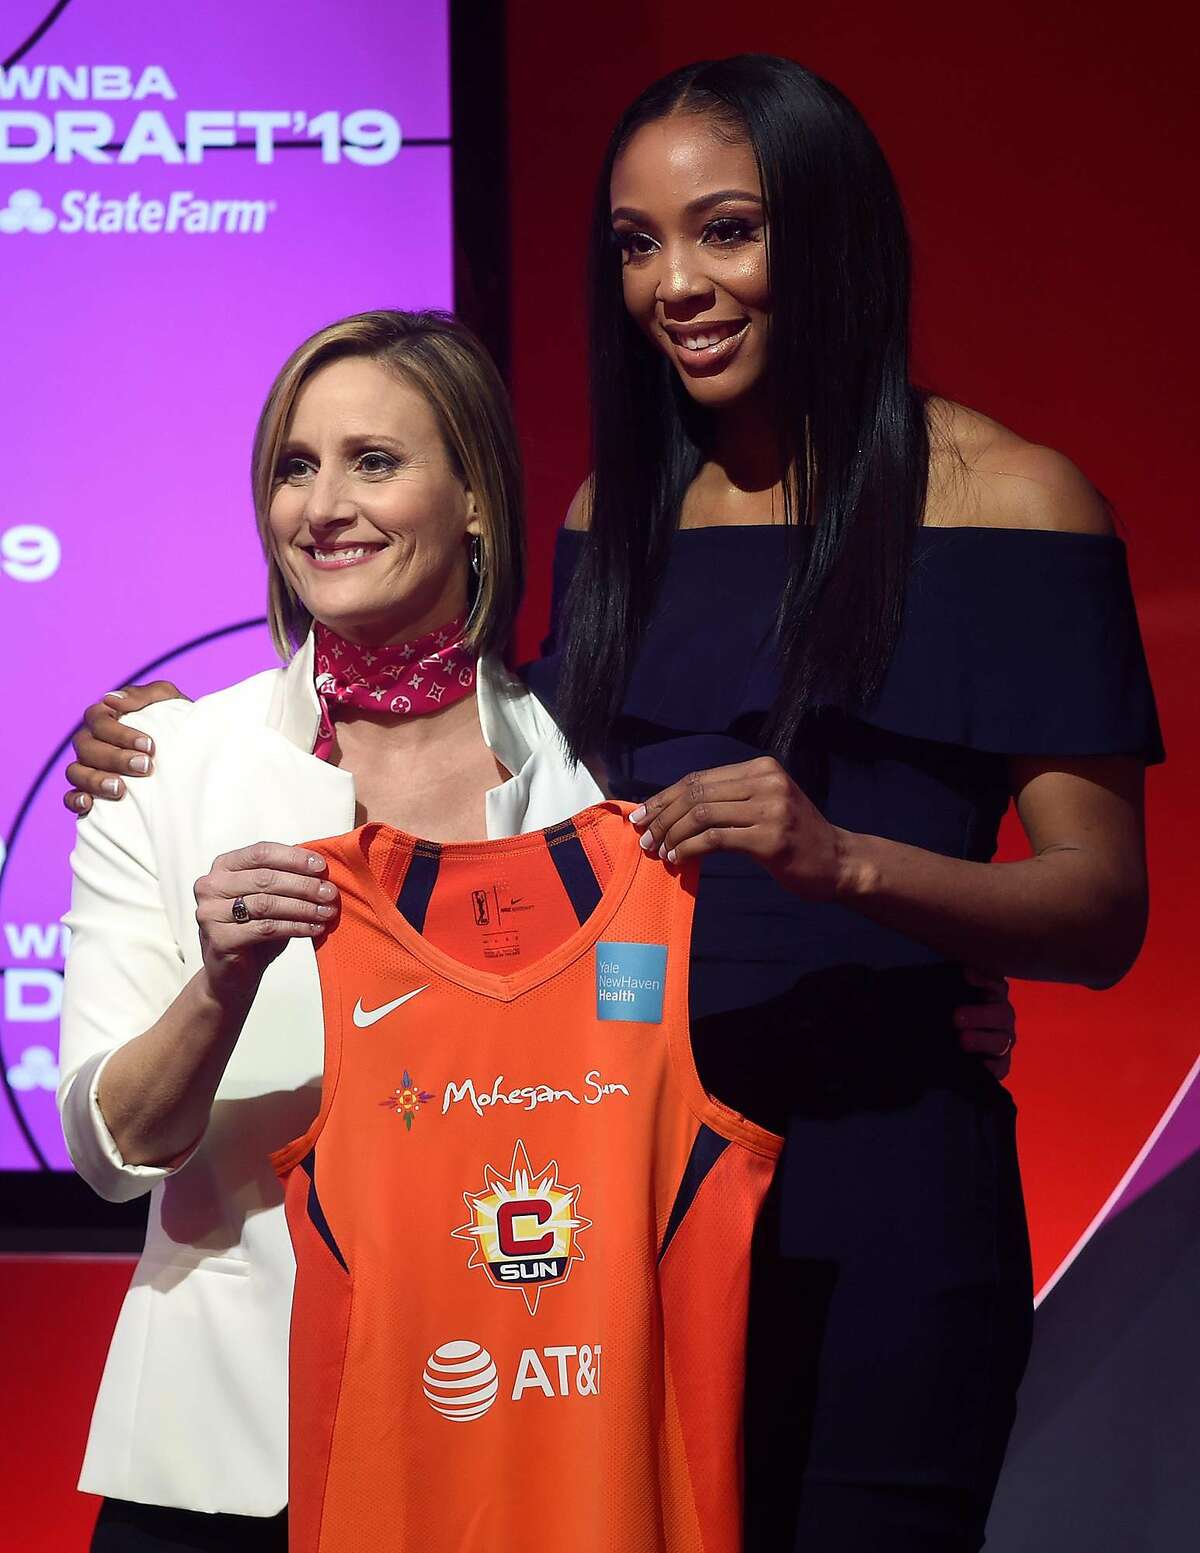 The Connecticut Sun select Kristine Anigwe, right, with the ninth overall pick at the WNBA draft at Nike NY headquarters on Wednesday, April 10, 2019, in New York. Presenting her with her jersey, at left, is WNBA COO Christin Fledgpeth. (Brad Horrigan/Hartford Courant/TNS)